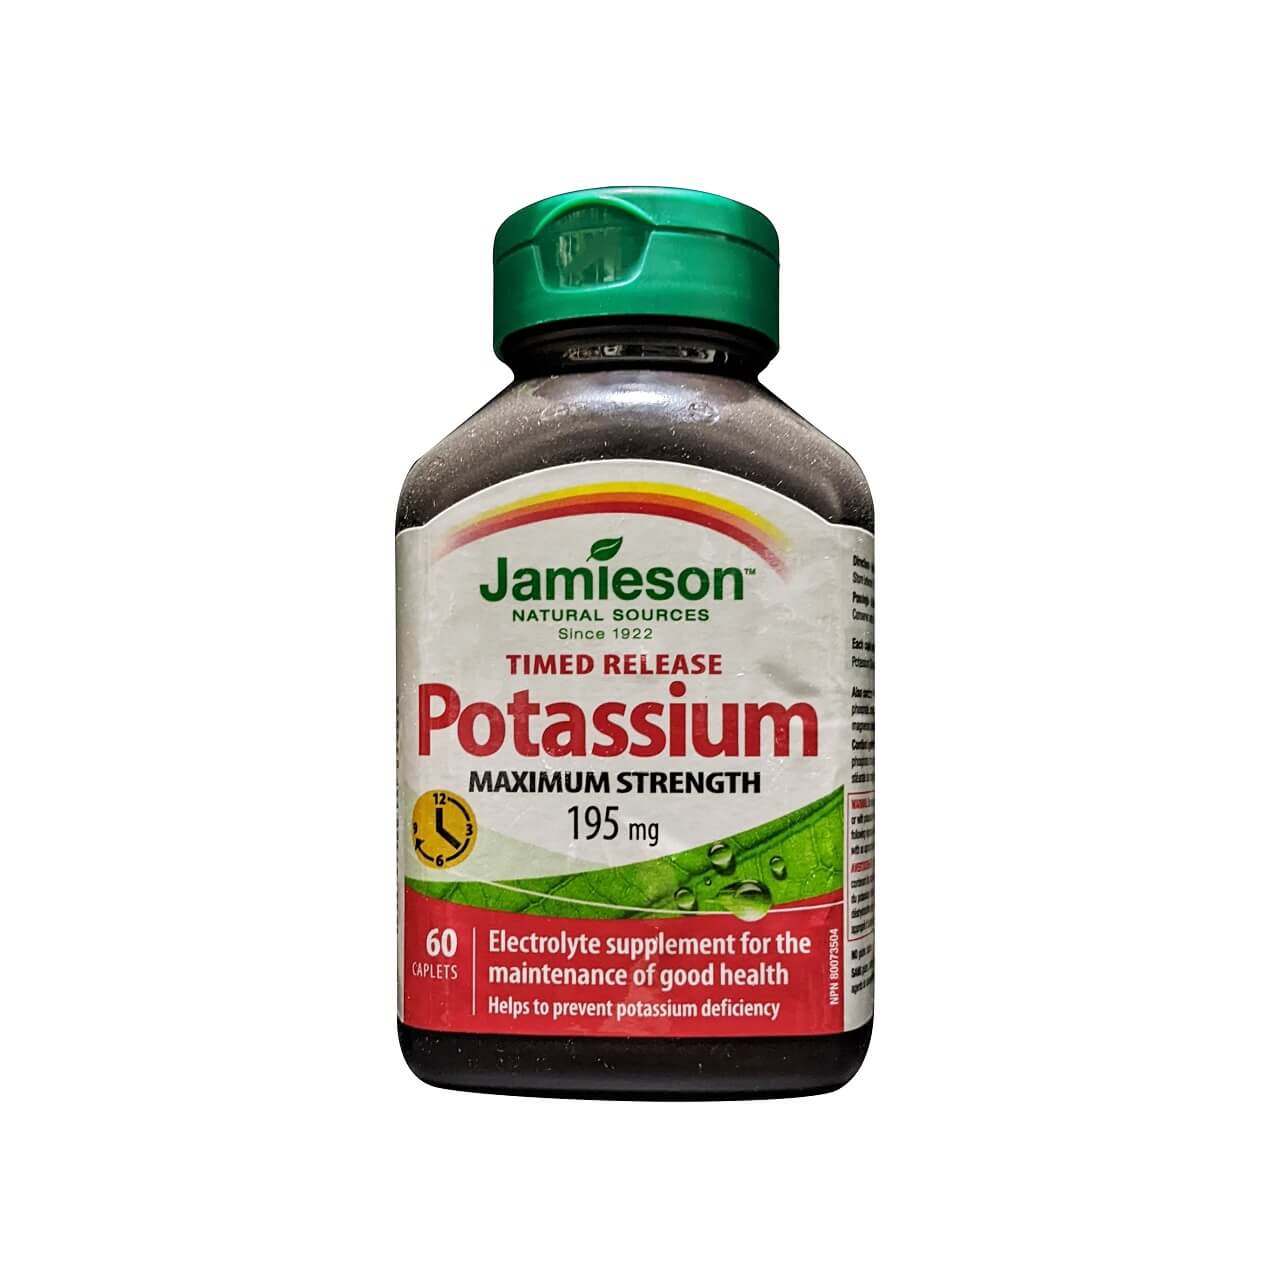 Product label for Jamieson Potassium 195 mg Maximum Strength Timed Release (60 caplets) in English